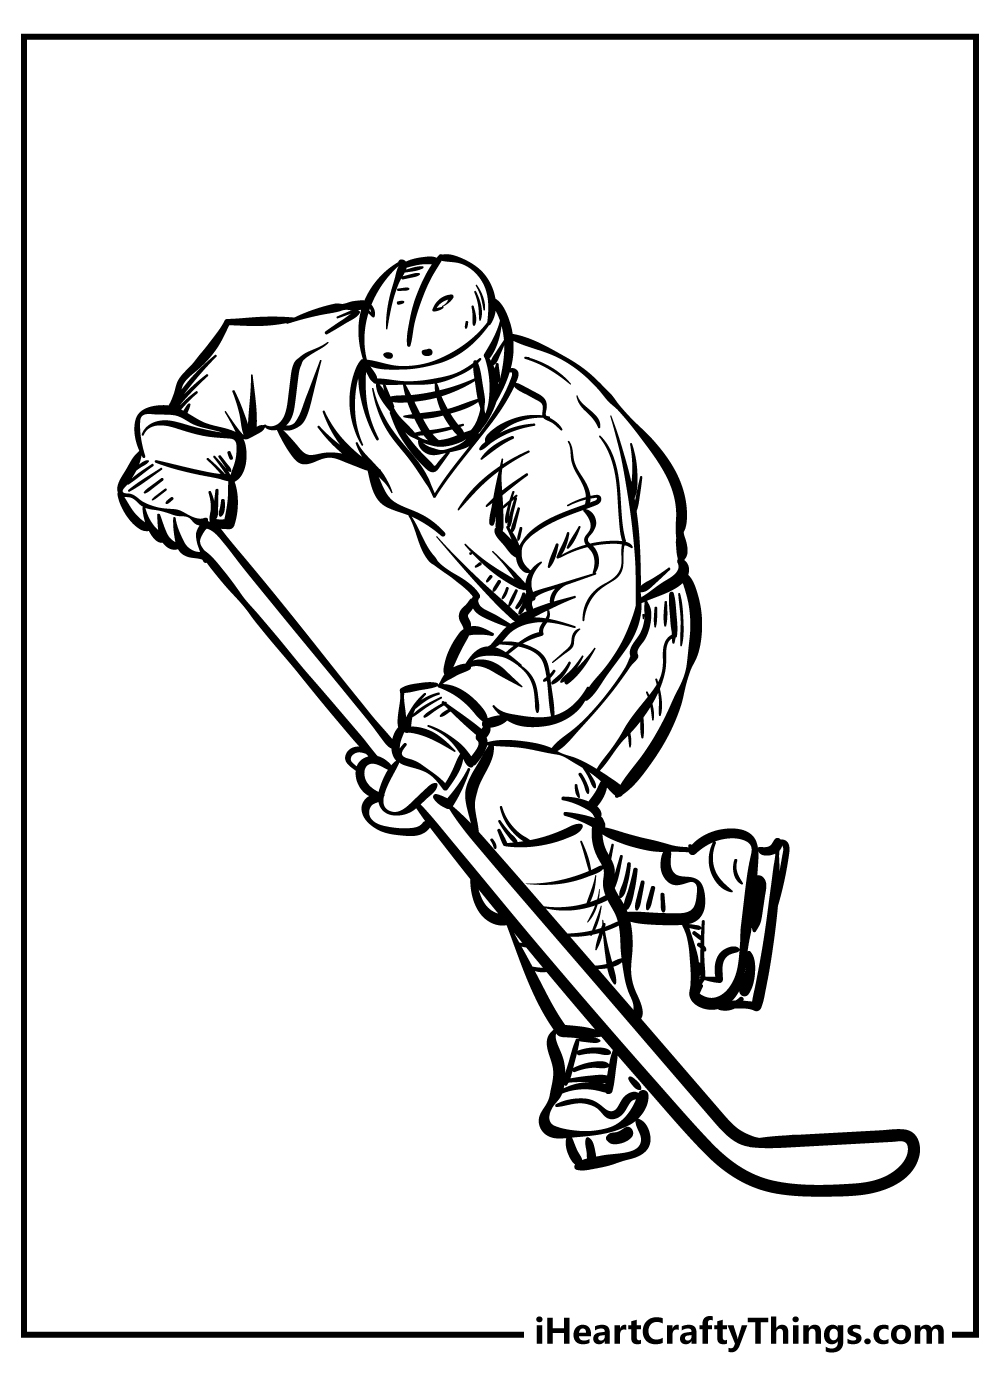 Hockey Coloring Sheet for children free download